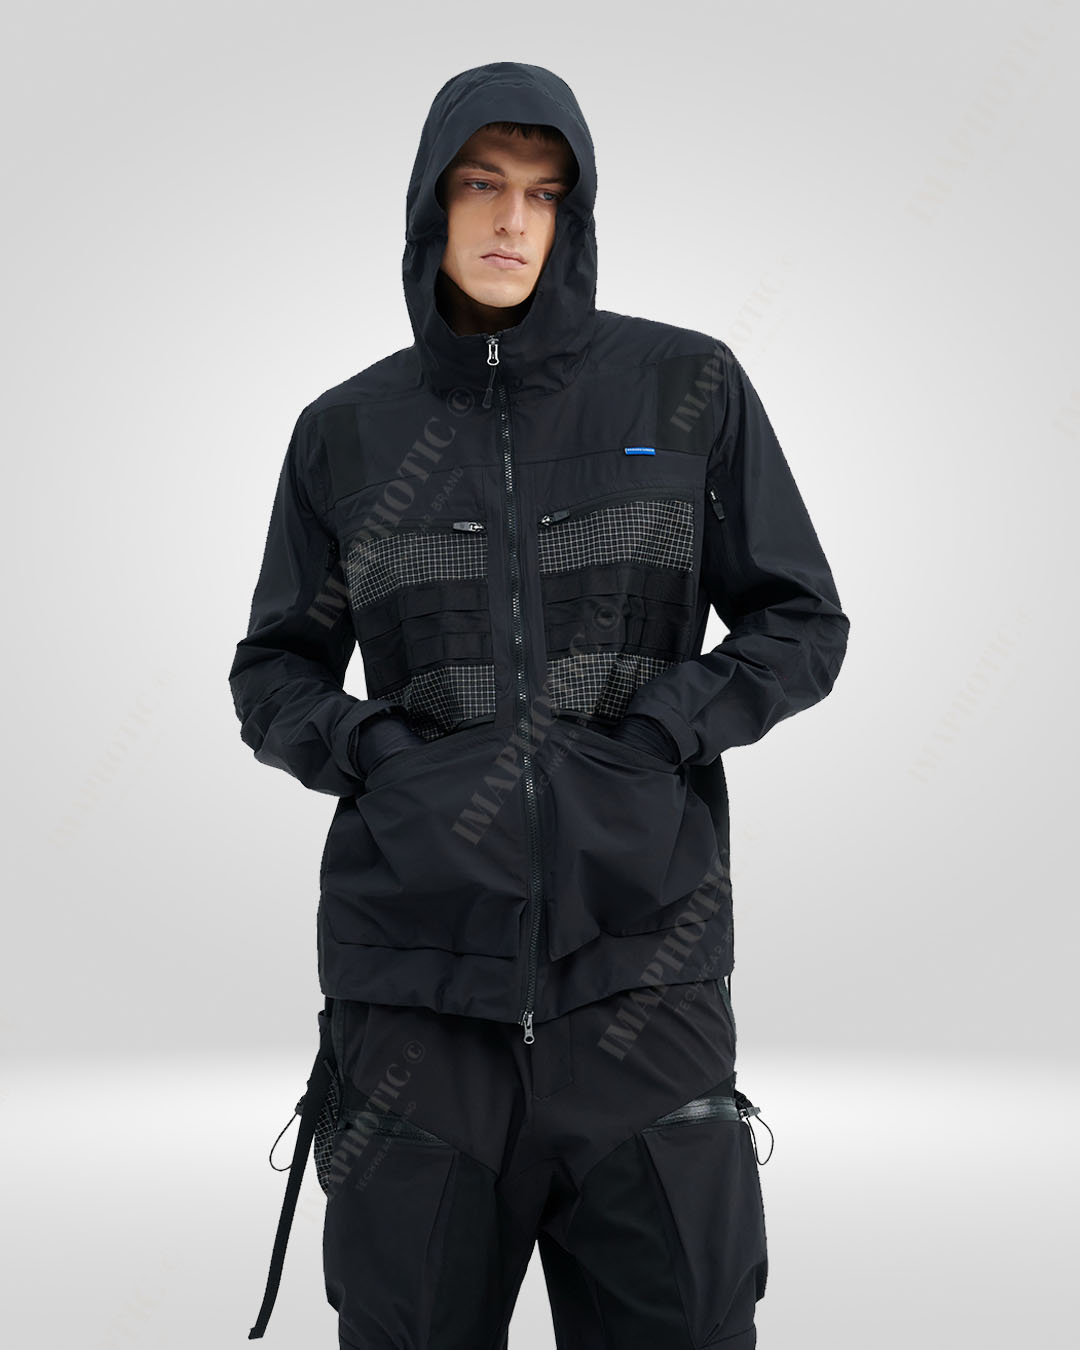 Adventurer's Hooded Outdoor Jacket - Defy the Elements in Style – Imaphotic